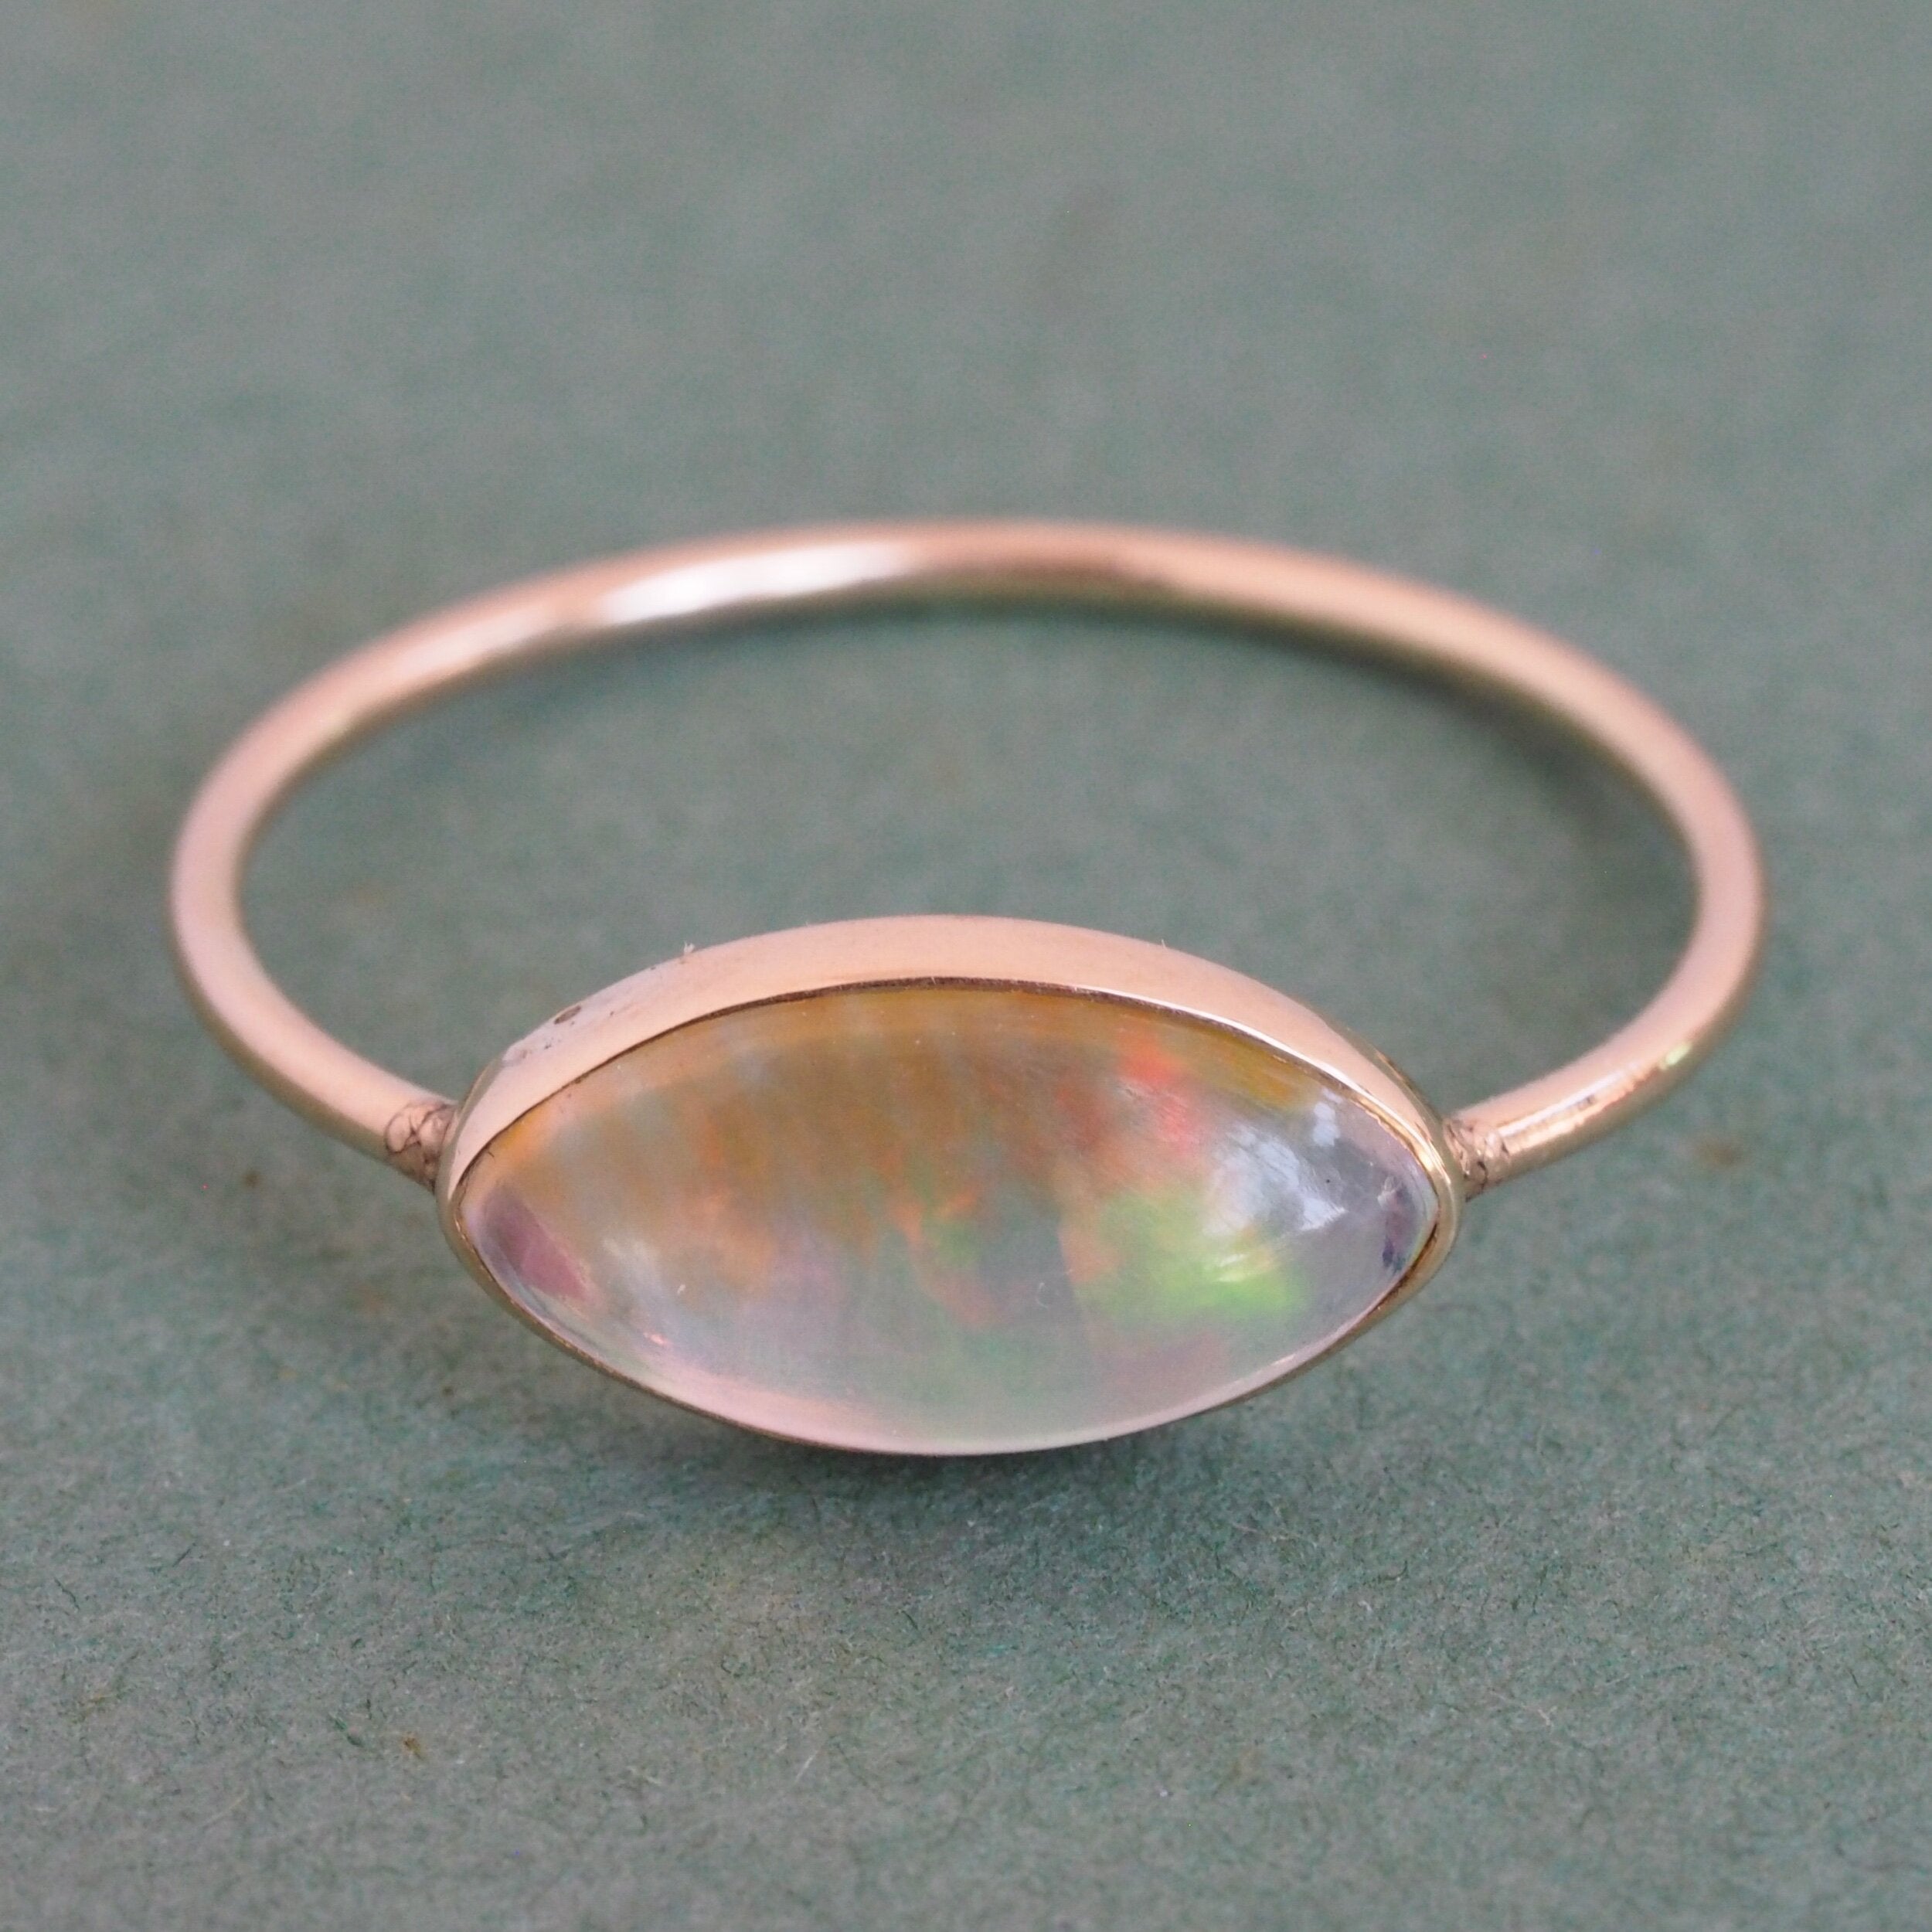 Antique Victorian 14k Gold Jelly Opal Ring